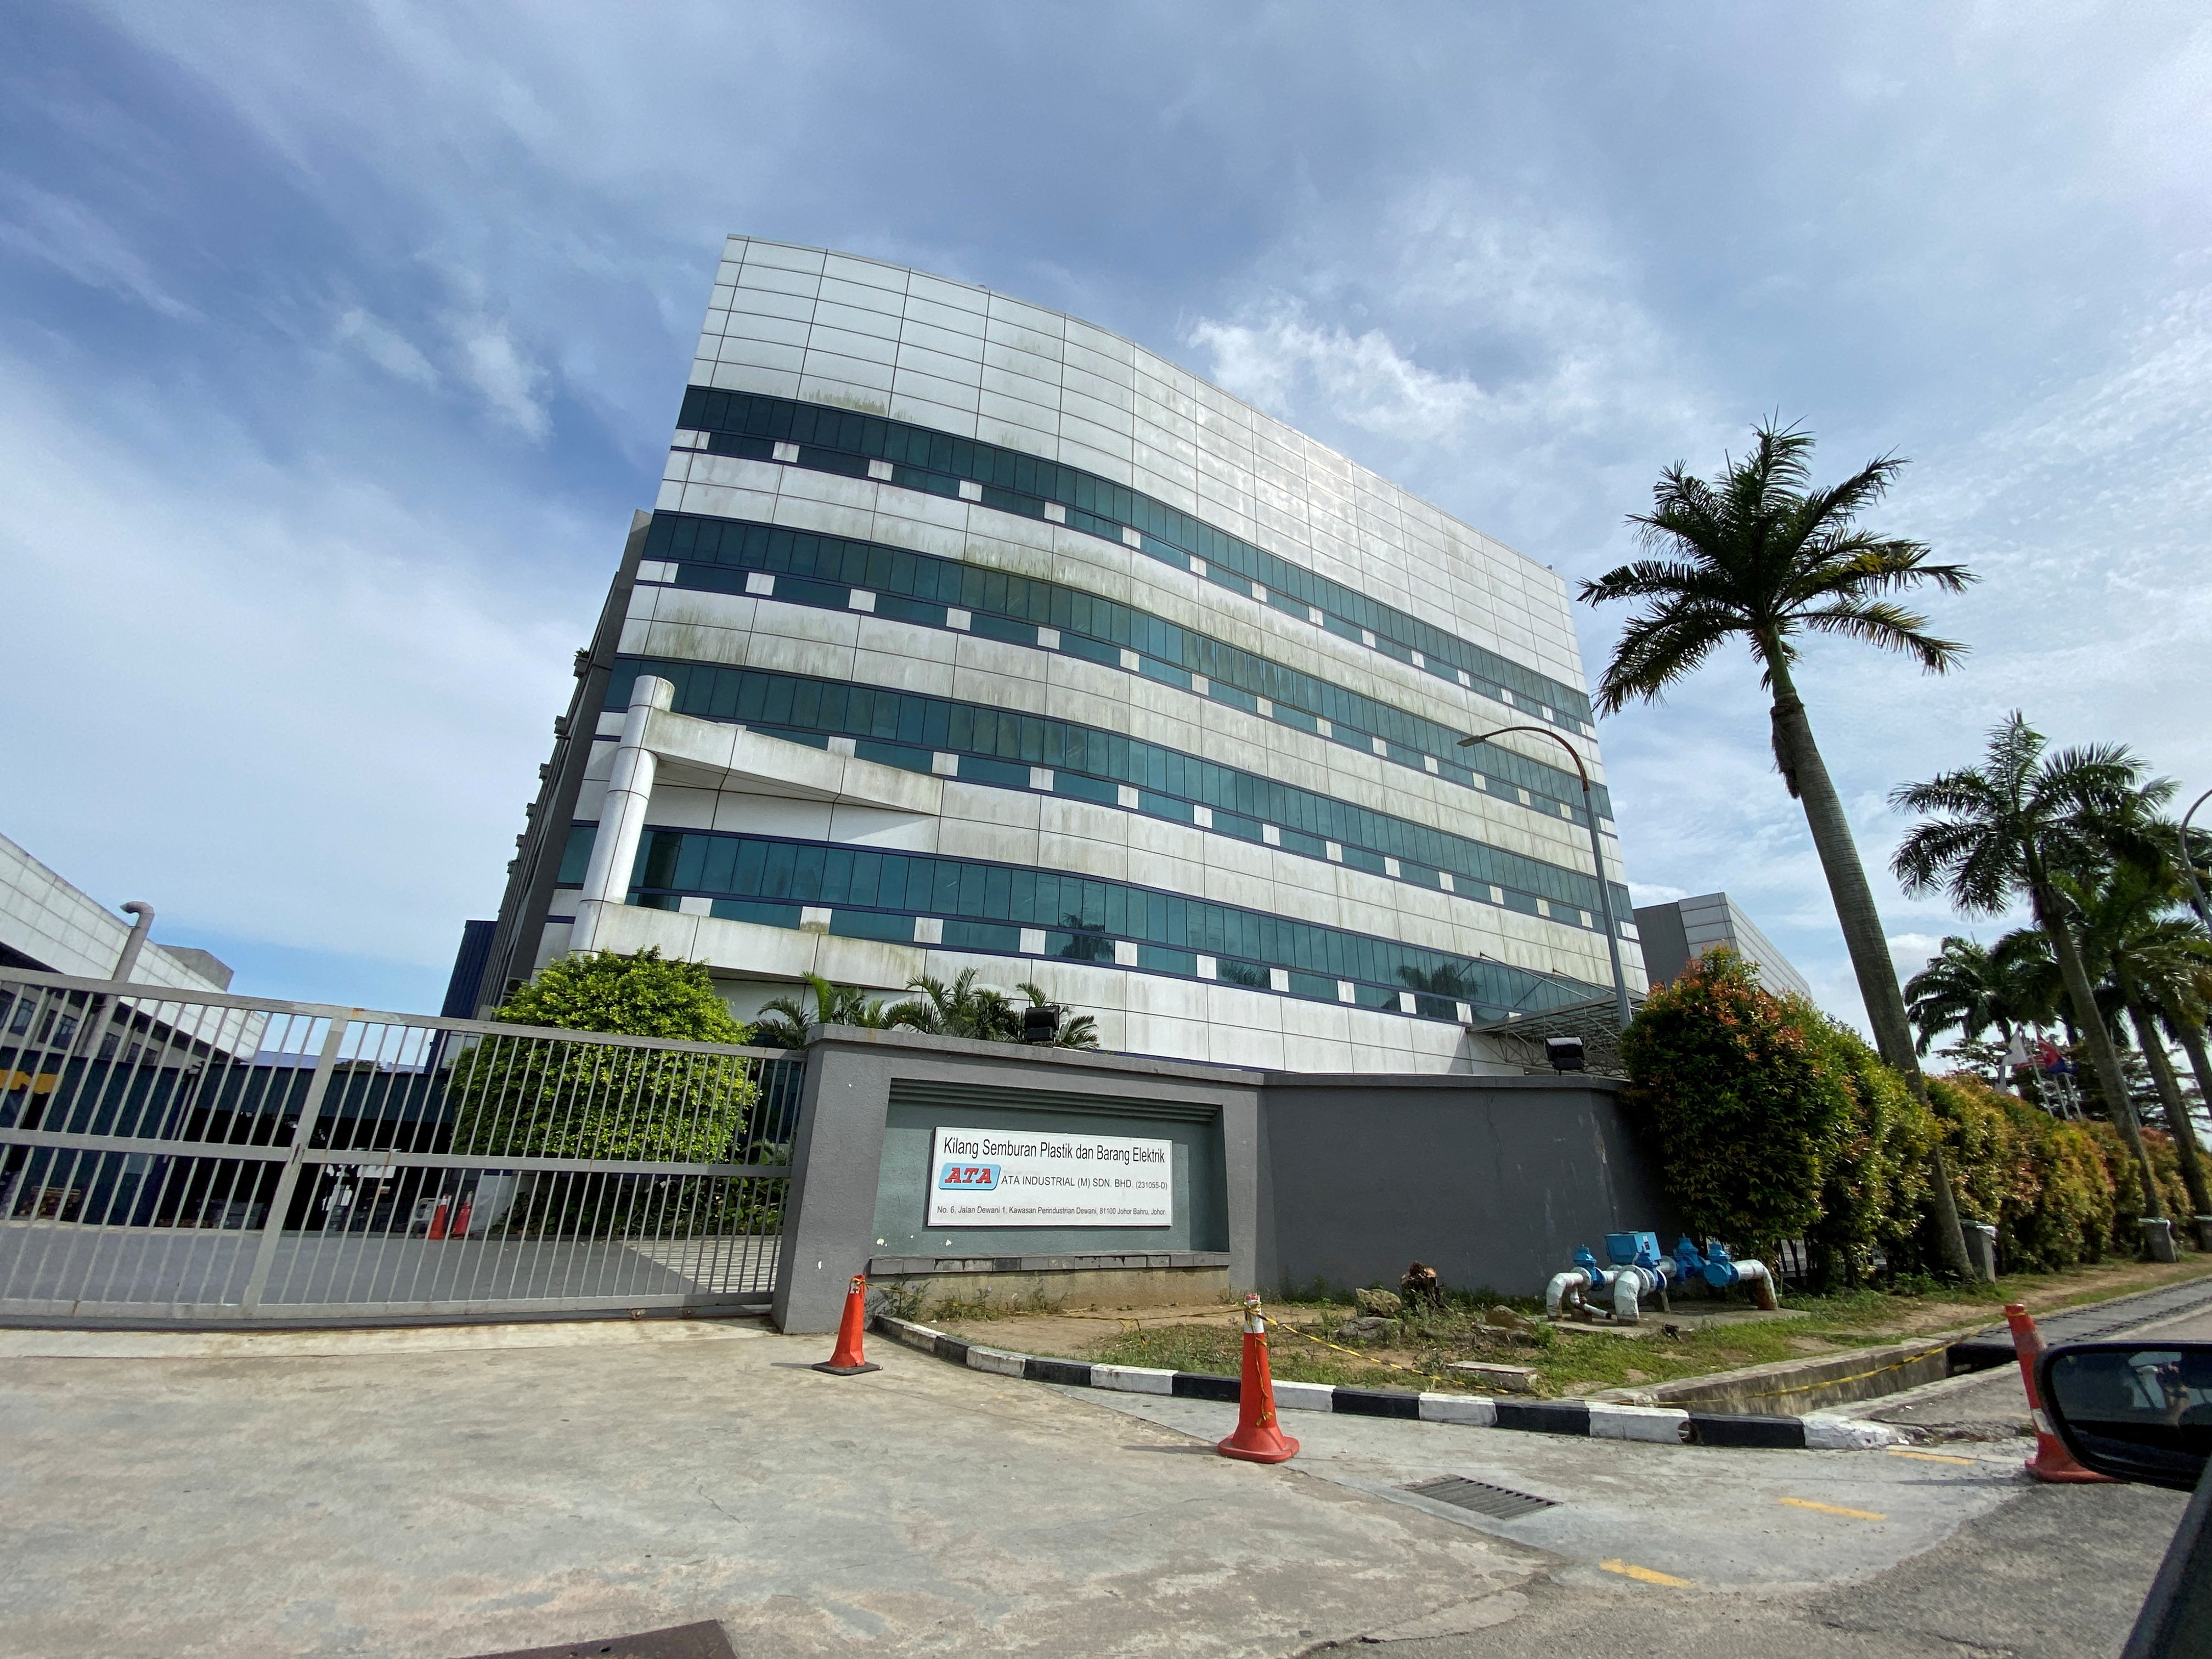 View of the exterior of one of the ATA IMS factory buildings in Johor Bahru, Malaysia